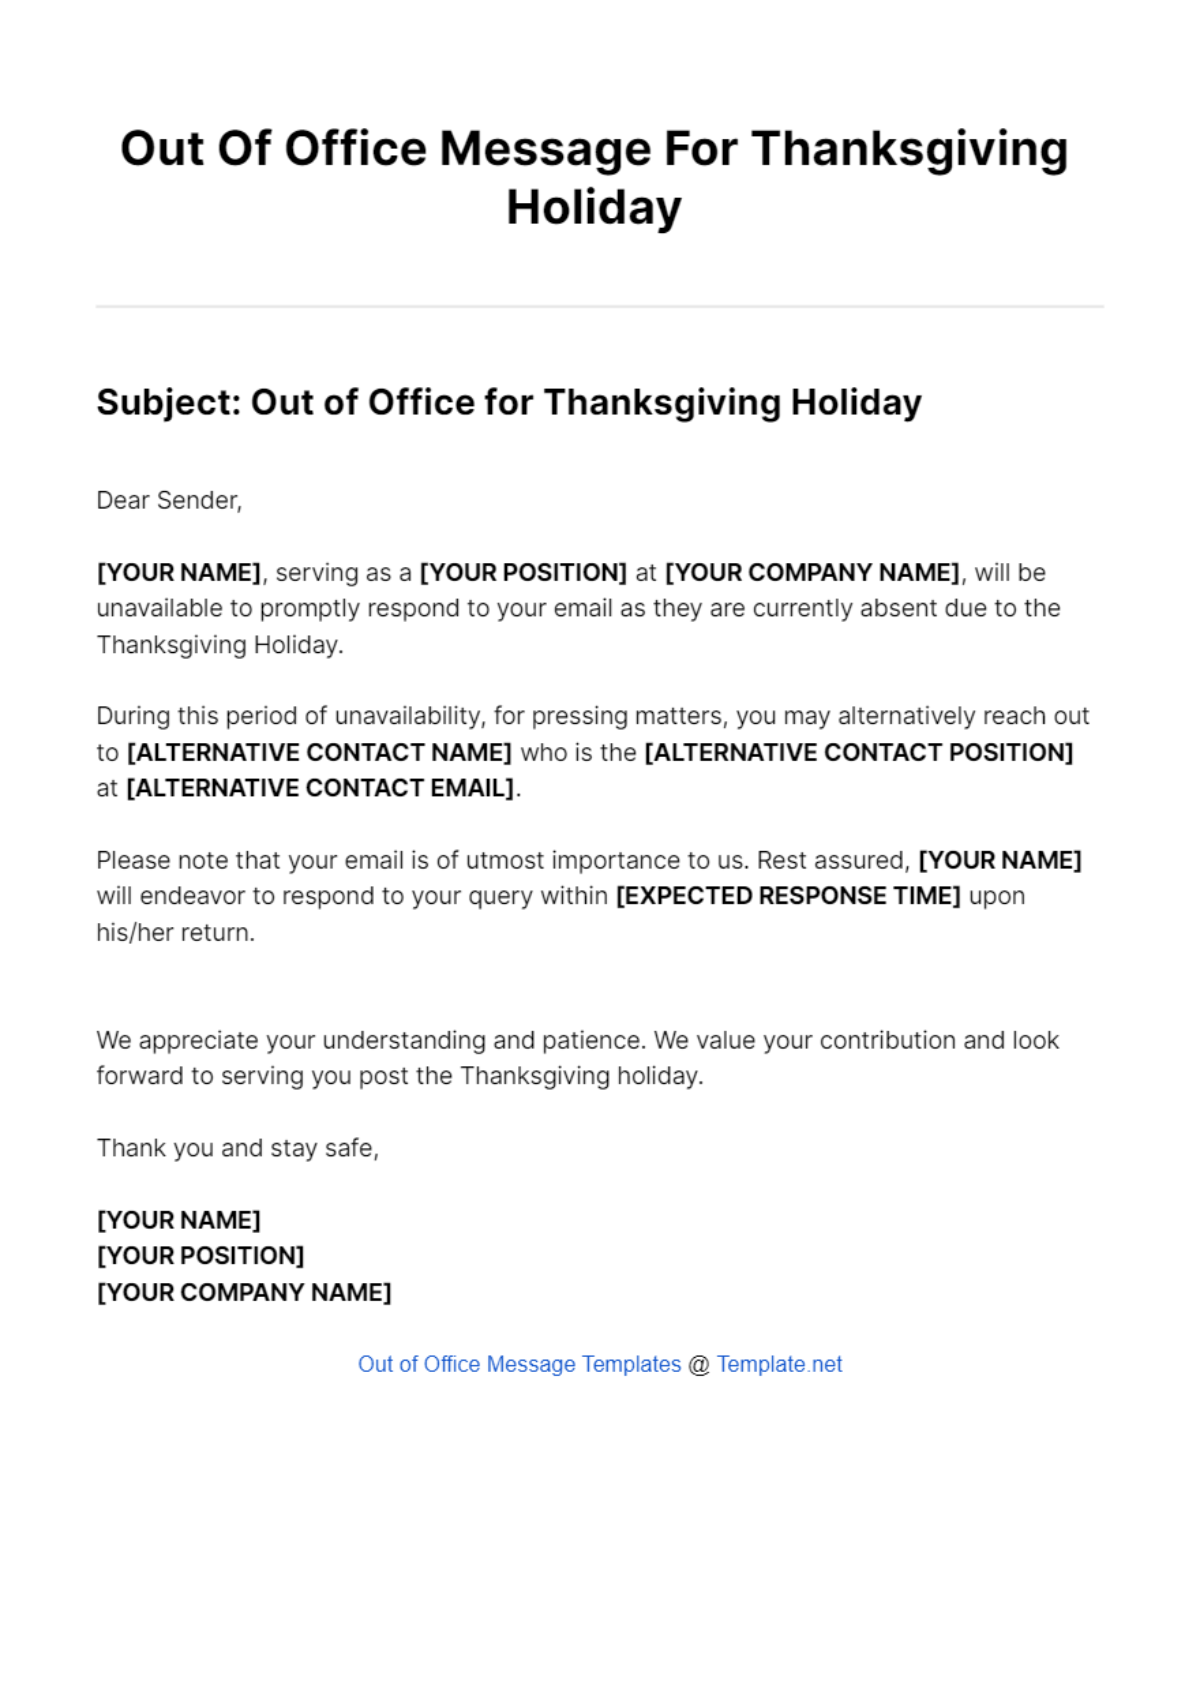 Out Of Office Message For Thanksgiving Holiday Template